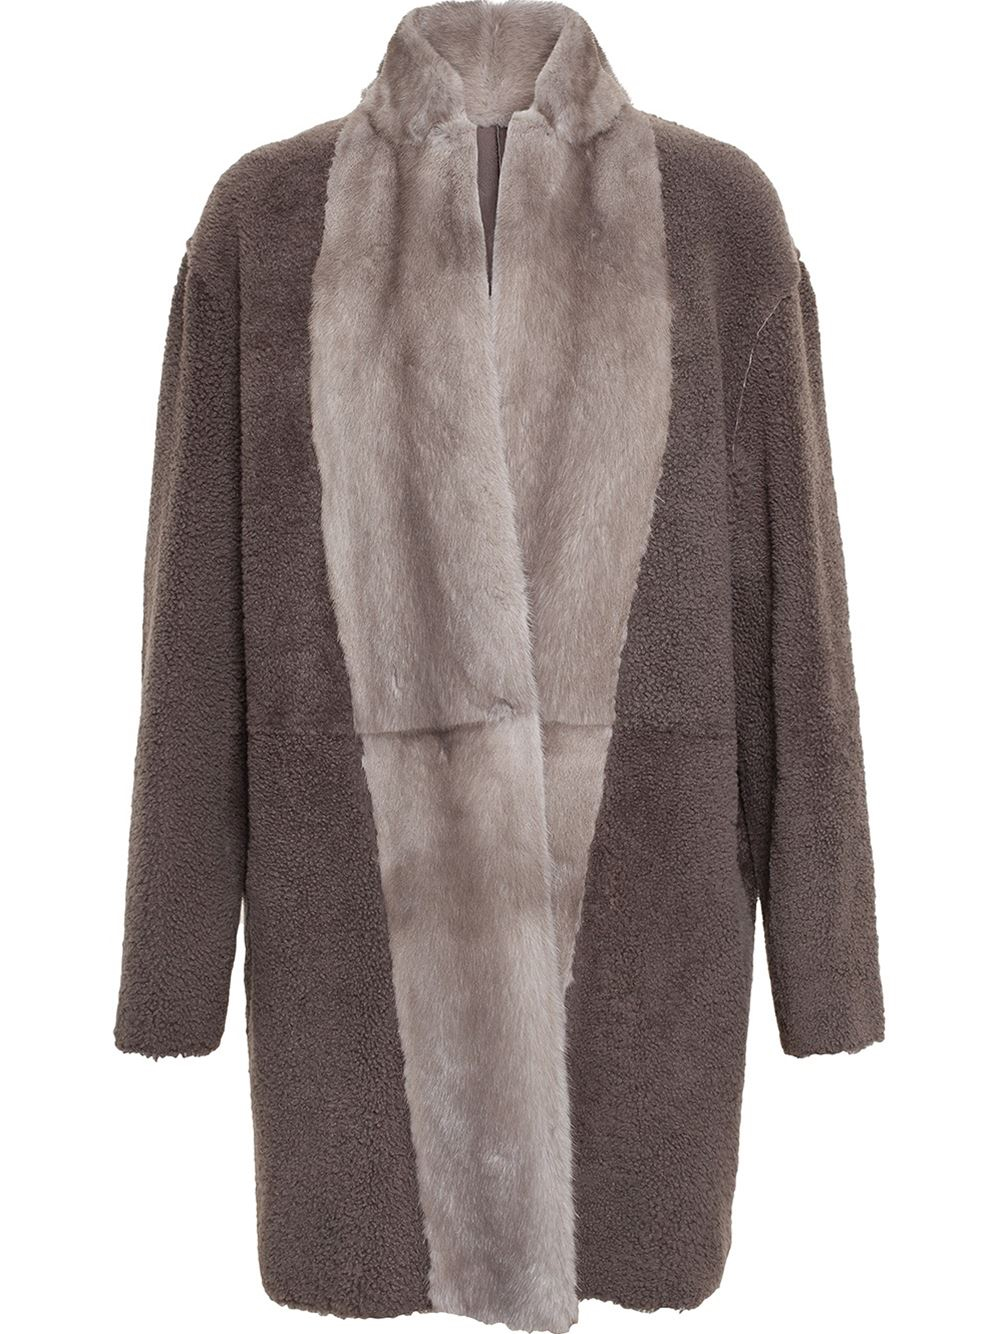 Yves salomon Mink and Shearling Coat in Brown | Lyst